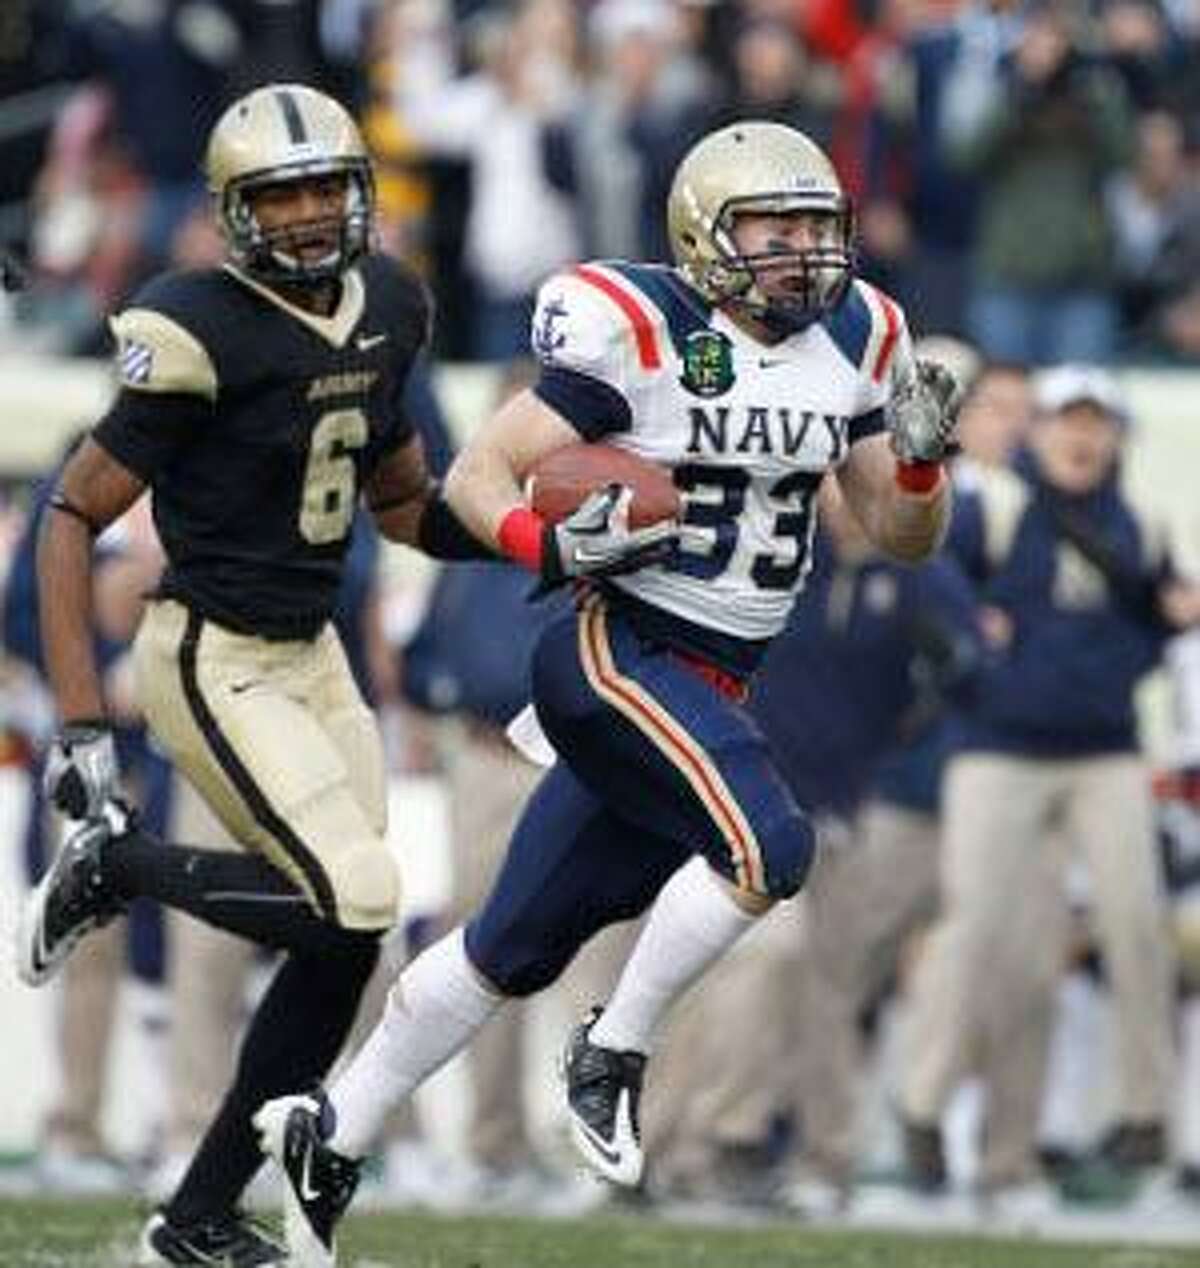 AP Navy running back John Howell, right, runs past Army cornerback Donovan Travis to score a touchdown in the first half of Saturday's game in Philadelphia. The Midshipmen won 31-17.